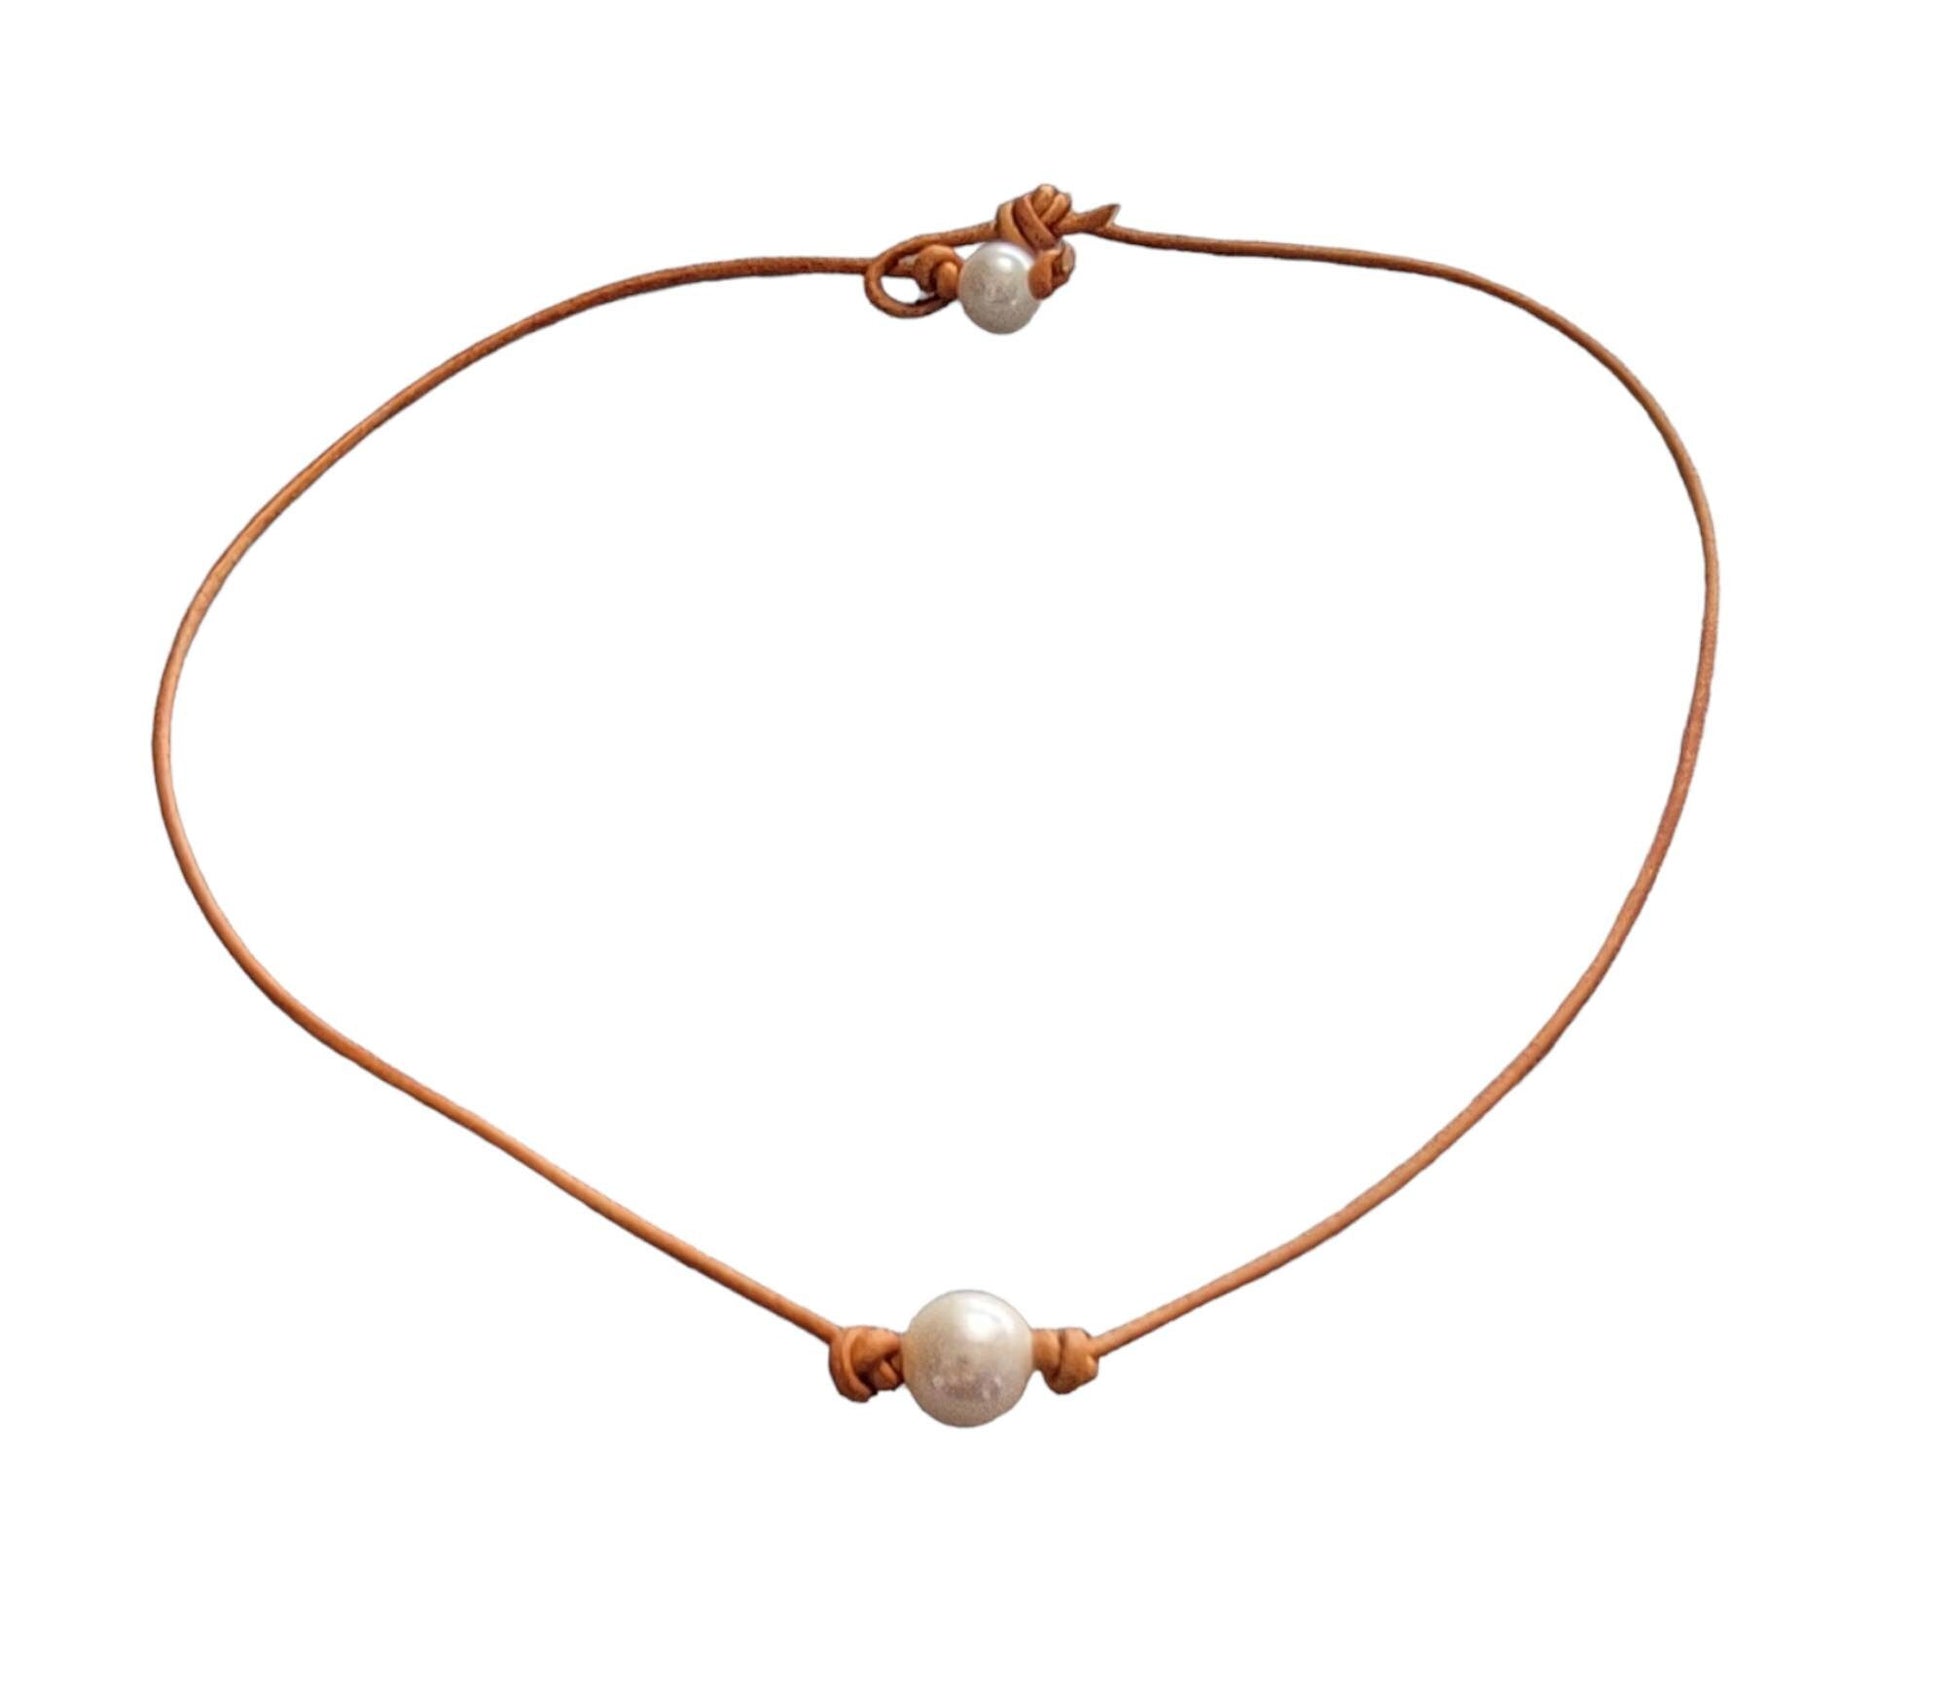 Single Pearl Leather Necklace, Floating Pearl Choker, Unisex Jewelry Gift